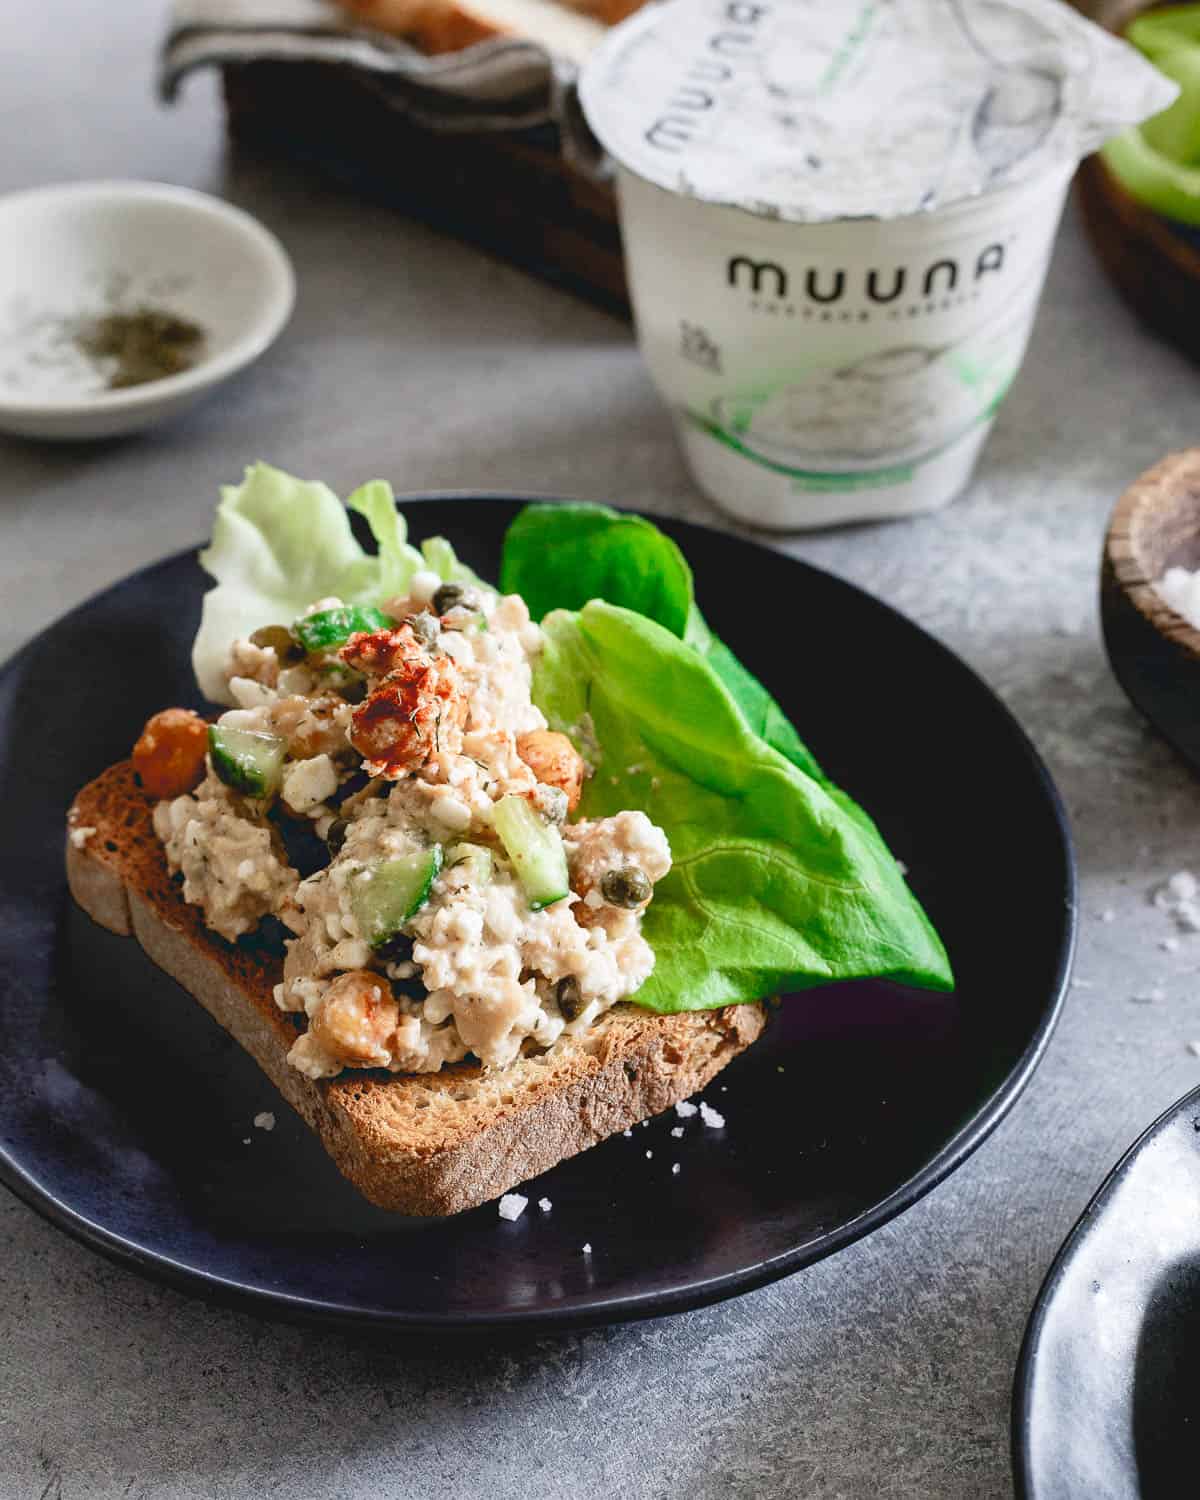 This easy salmon salad is a protein packed, nutritious and flavorful lunch made with fresh dill, lemon, dijon mustard, salty capers, smoky roasted chickpeas and cottage cheese. Serve it on some toasted bread or in lettuce wraps.